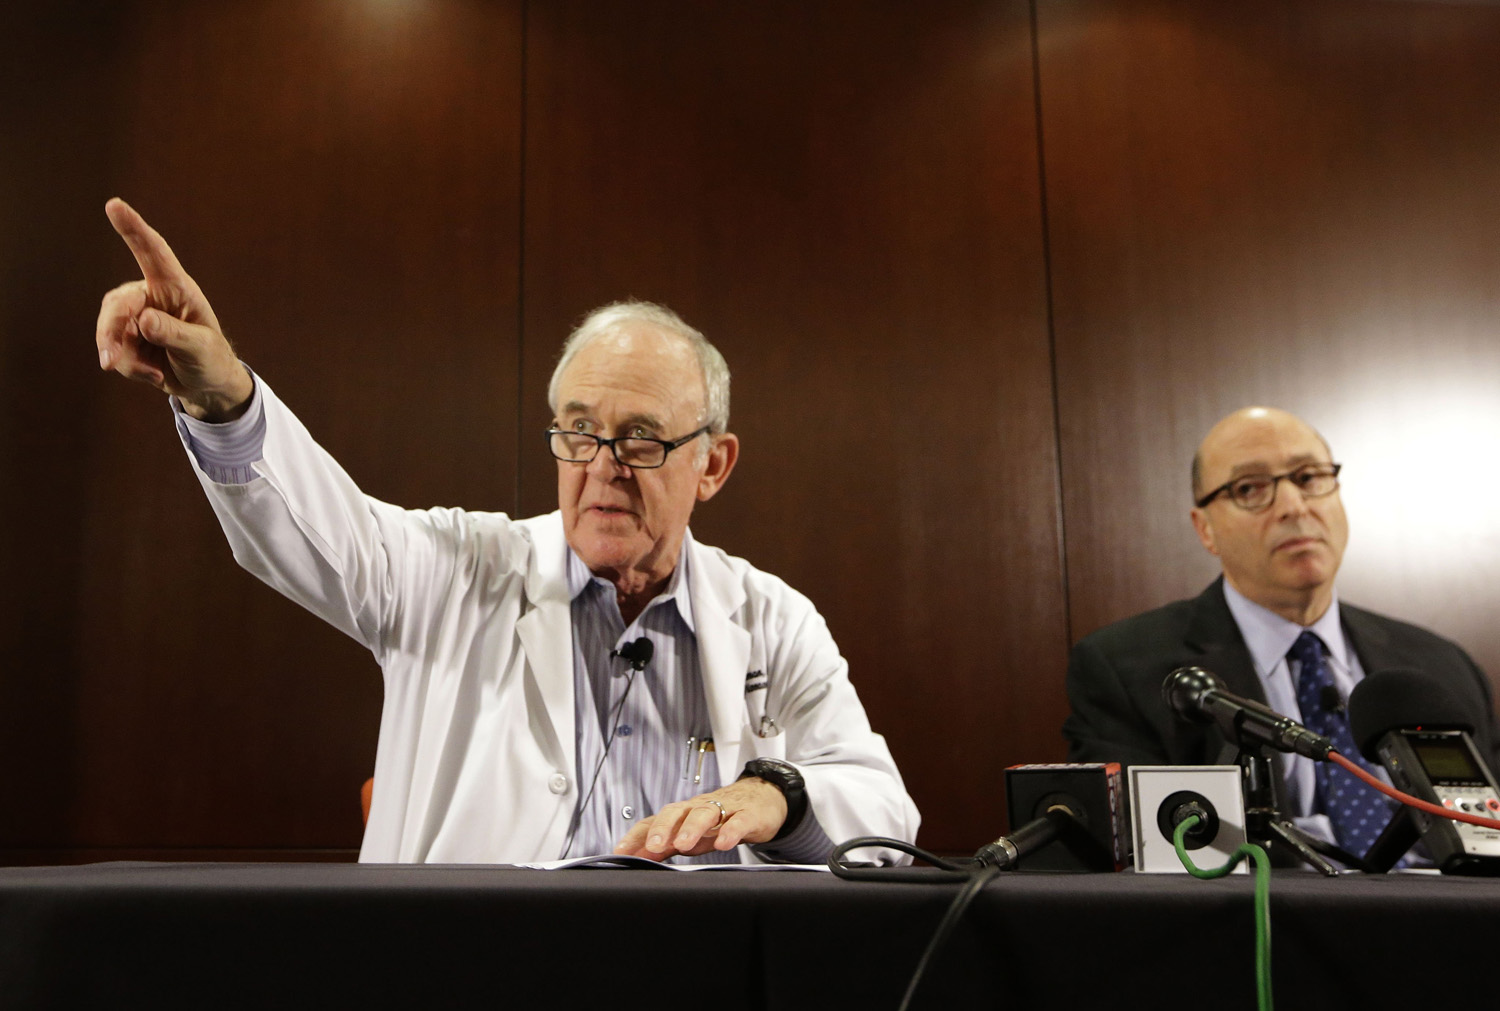 Dr. Edward Goodman, left, epidemiologist at Texas Health Presbyterian Hospital Dallas, points to a reporter for a question as Dr. Mark Lester looks on during a news conference about an Ebola infected patient they are caring for in Dallas, Sept. 30, 2014. (LM Otero—AP)